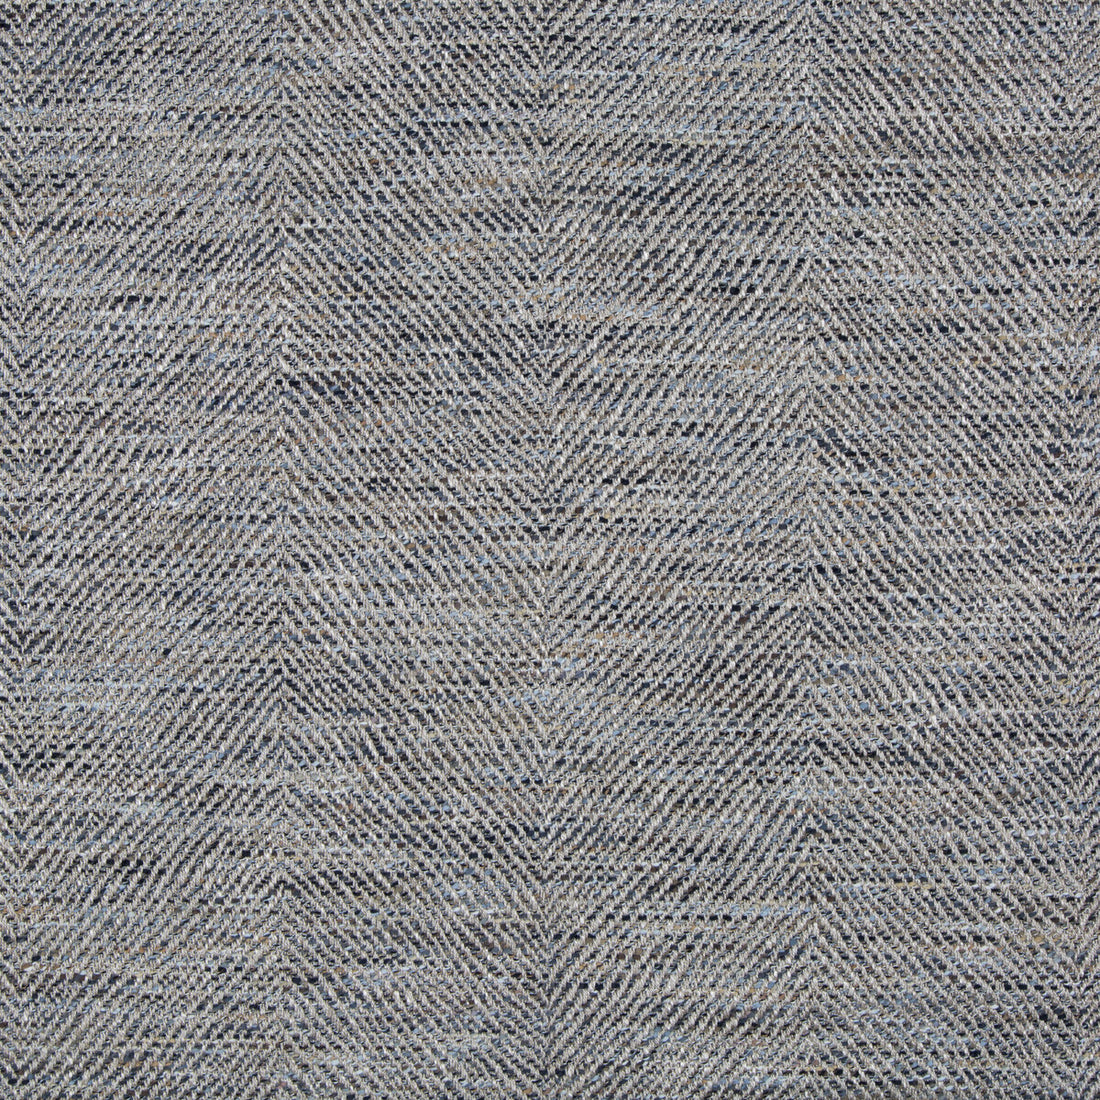 Sarada Texture fabric in stone/fog color - pattern 8015176.816.0 - by Brunschwig &amp; Fils in the Cape Comorin collection